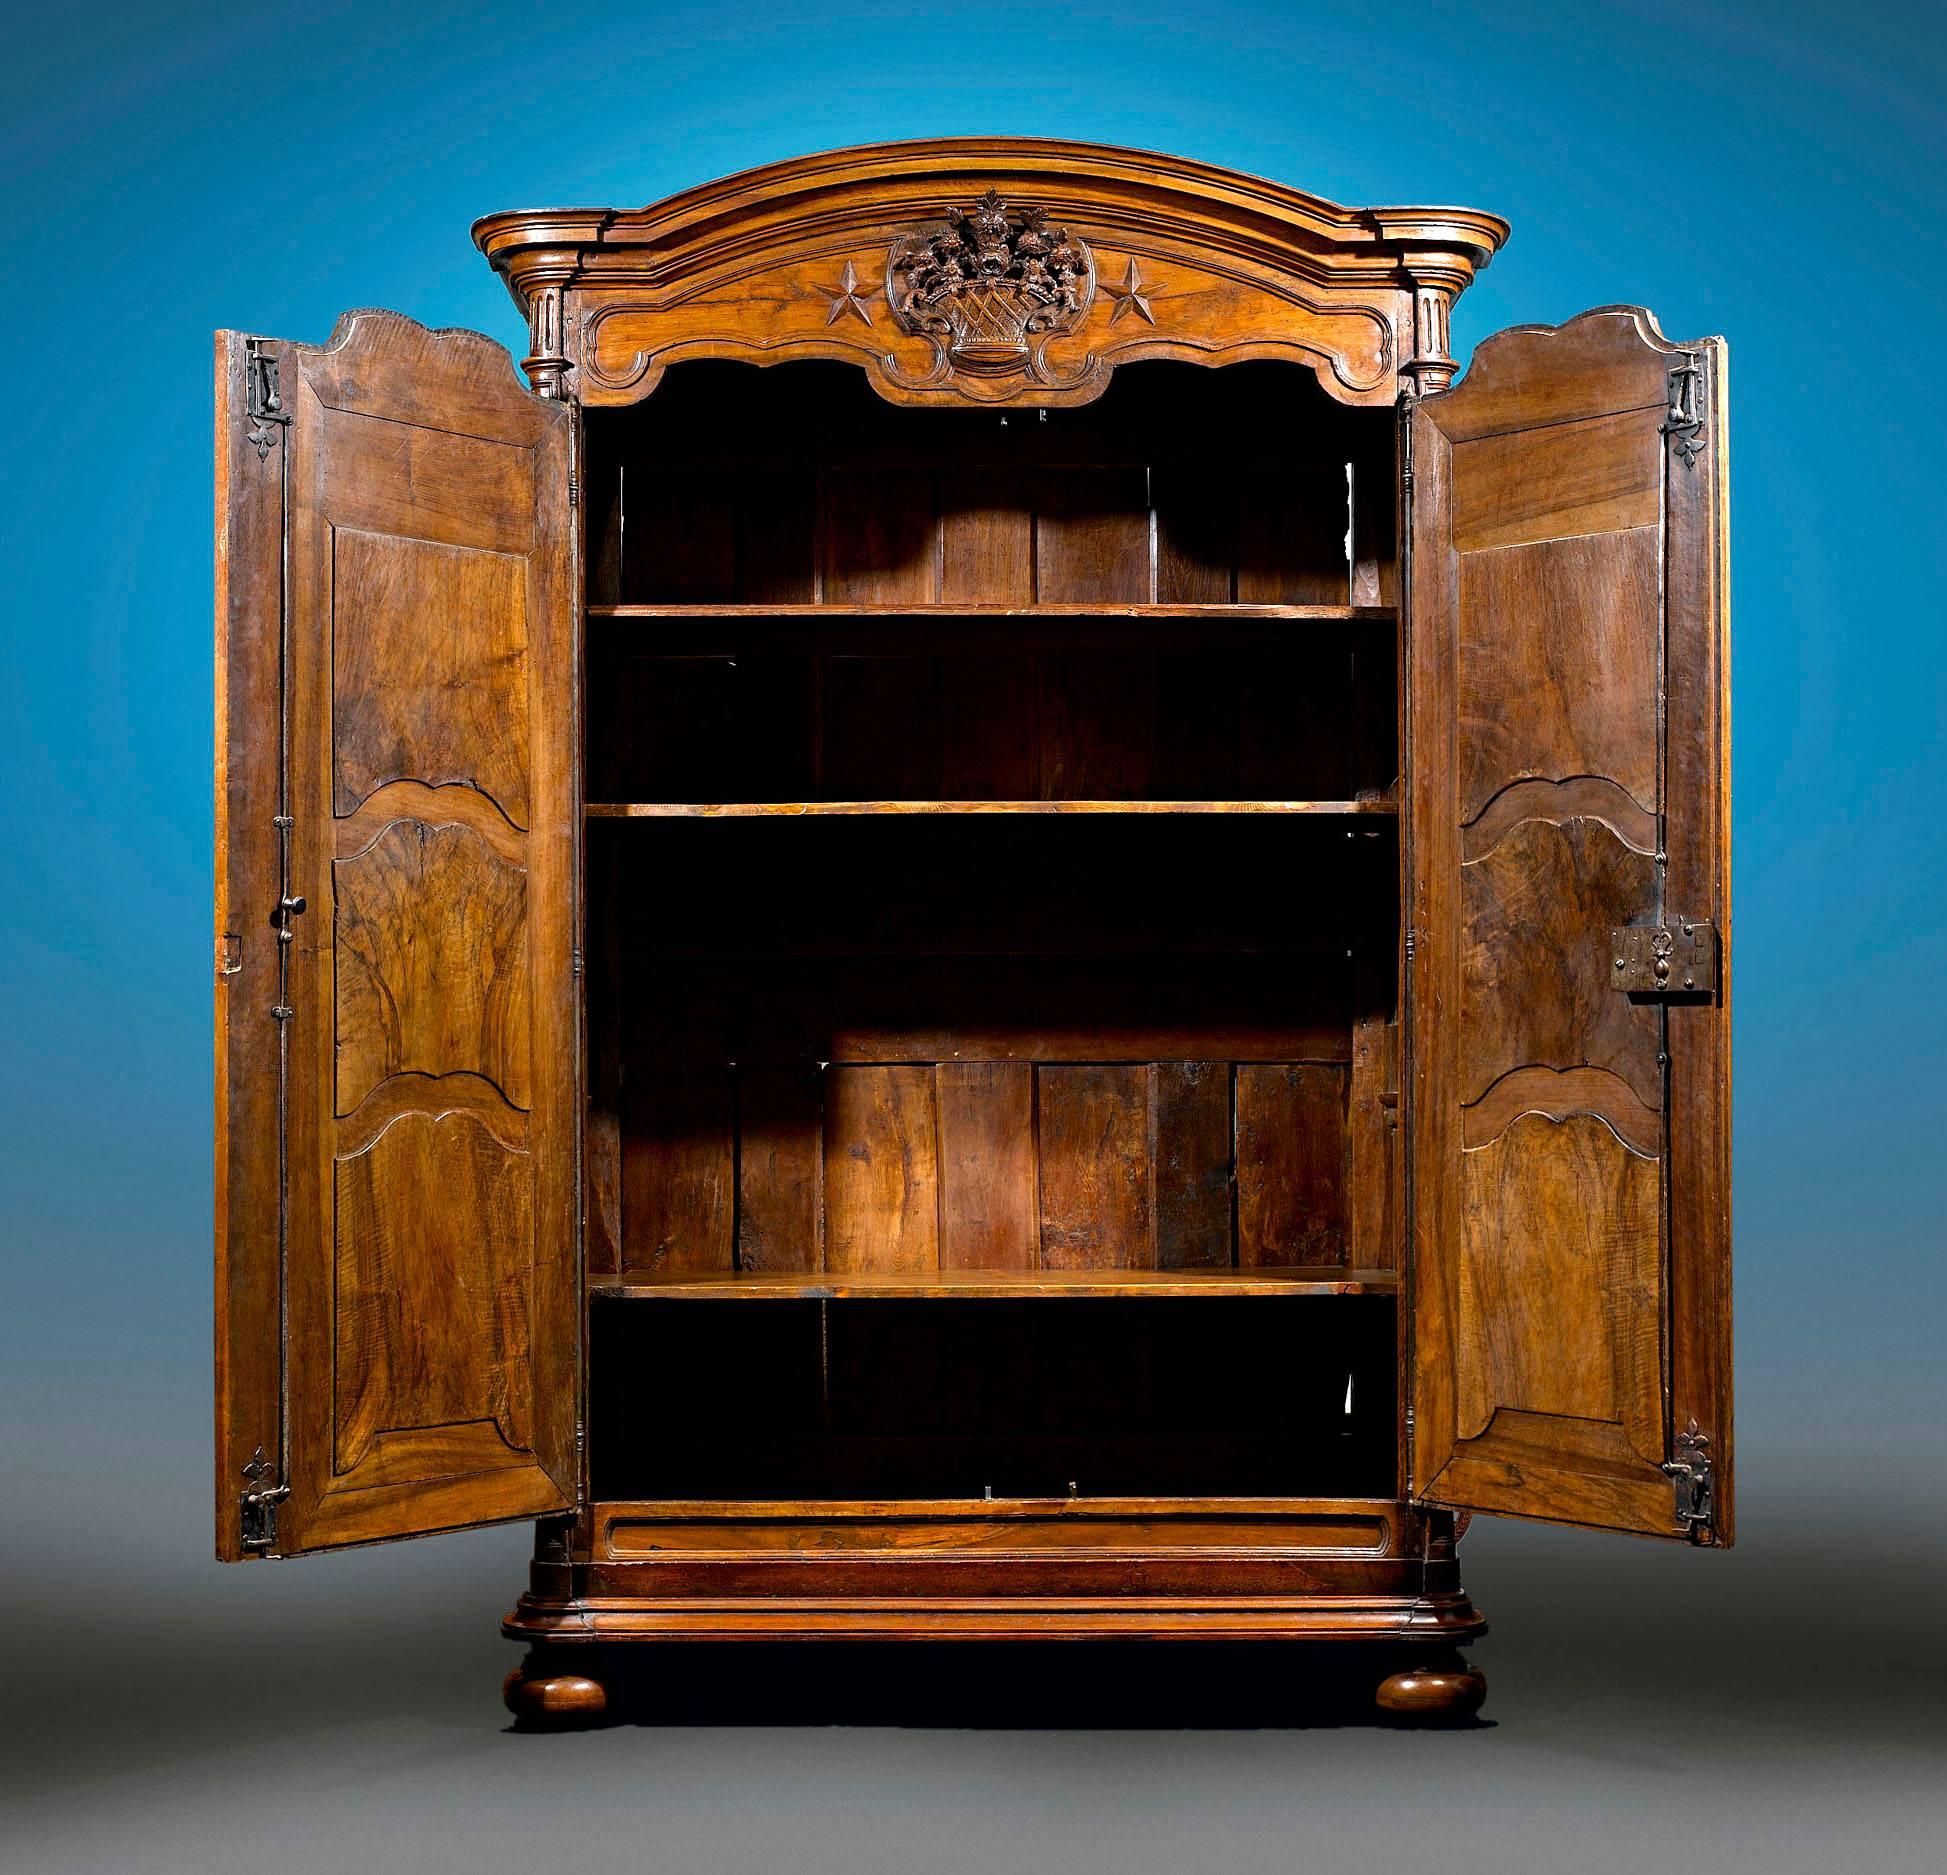 This monumental Louis XV armoire exhibits the rare beauty of French Provincial furniture. Crafted of lustrous walnut, this armoire features double doors, one of which opens with the original key, while the other opens with an interior latch.